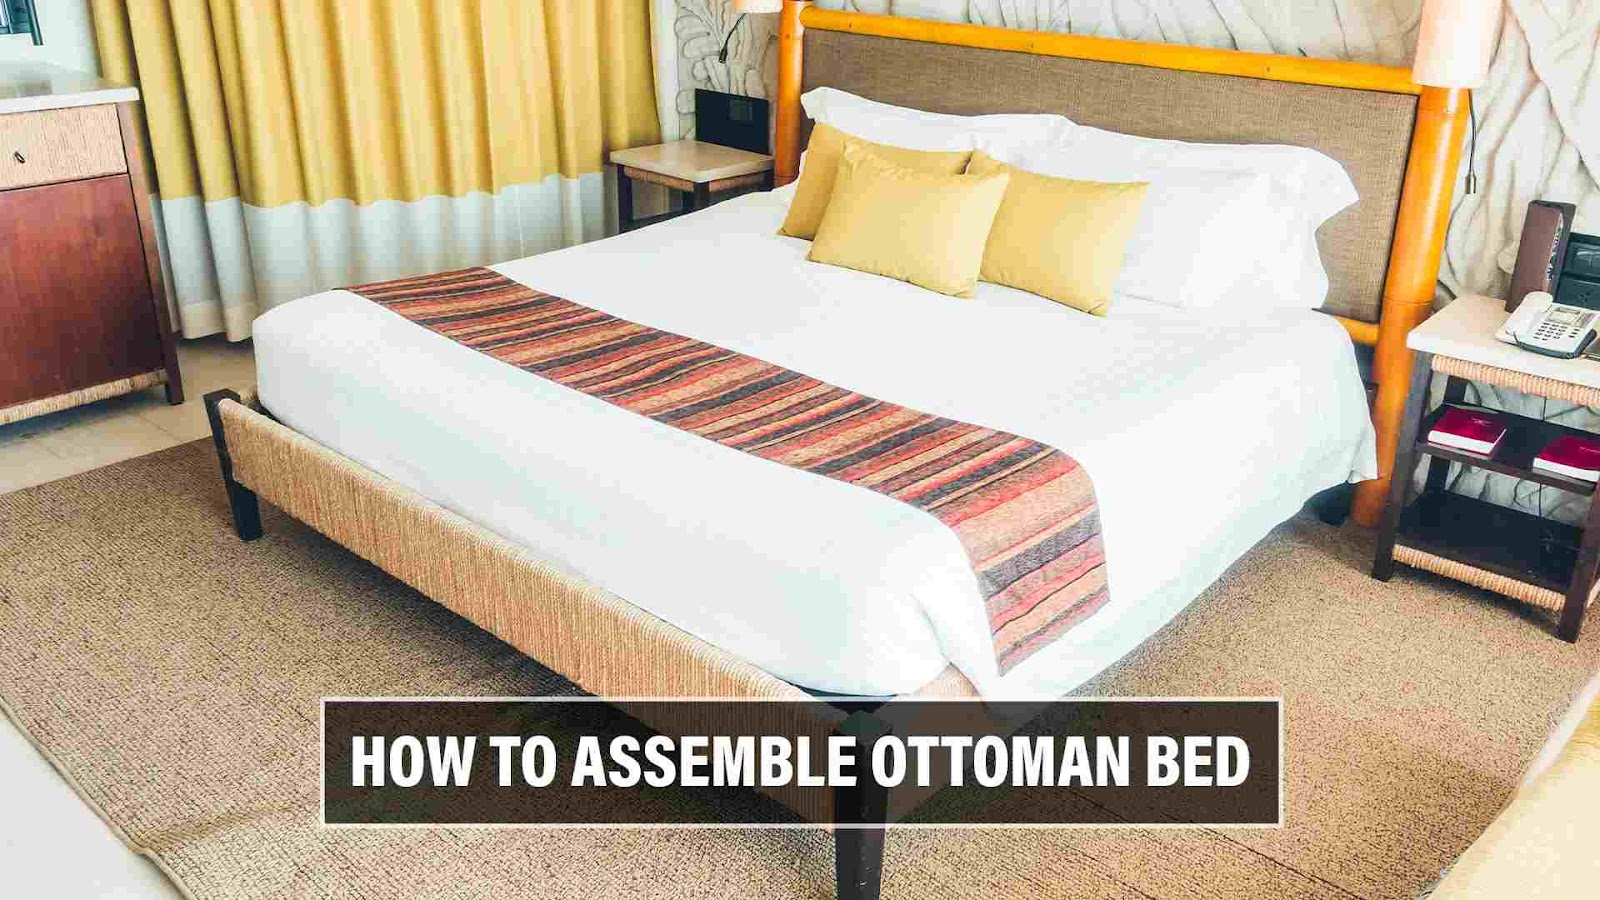 How to Assemble Ottoman Bed